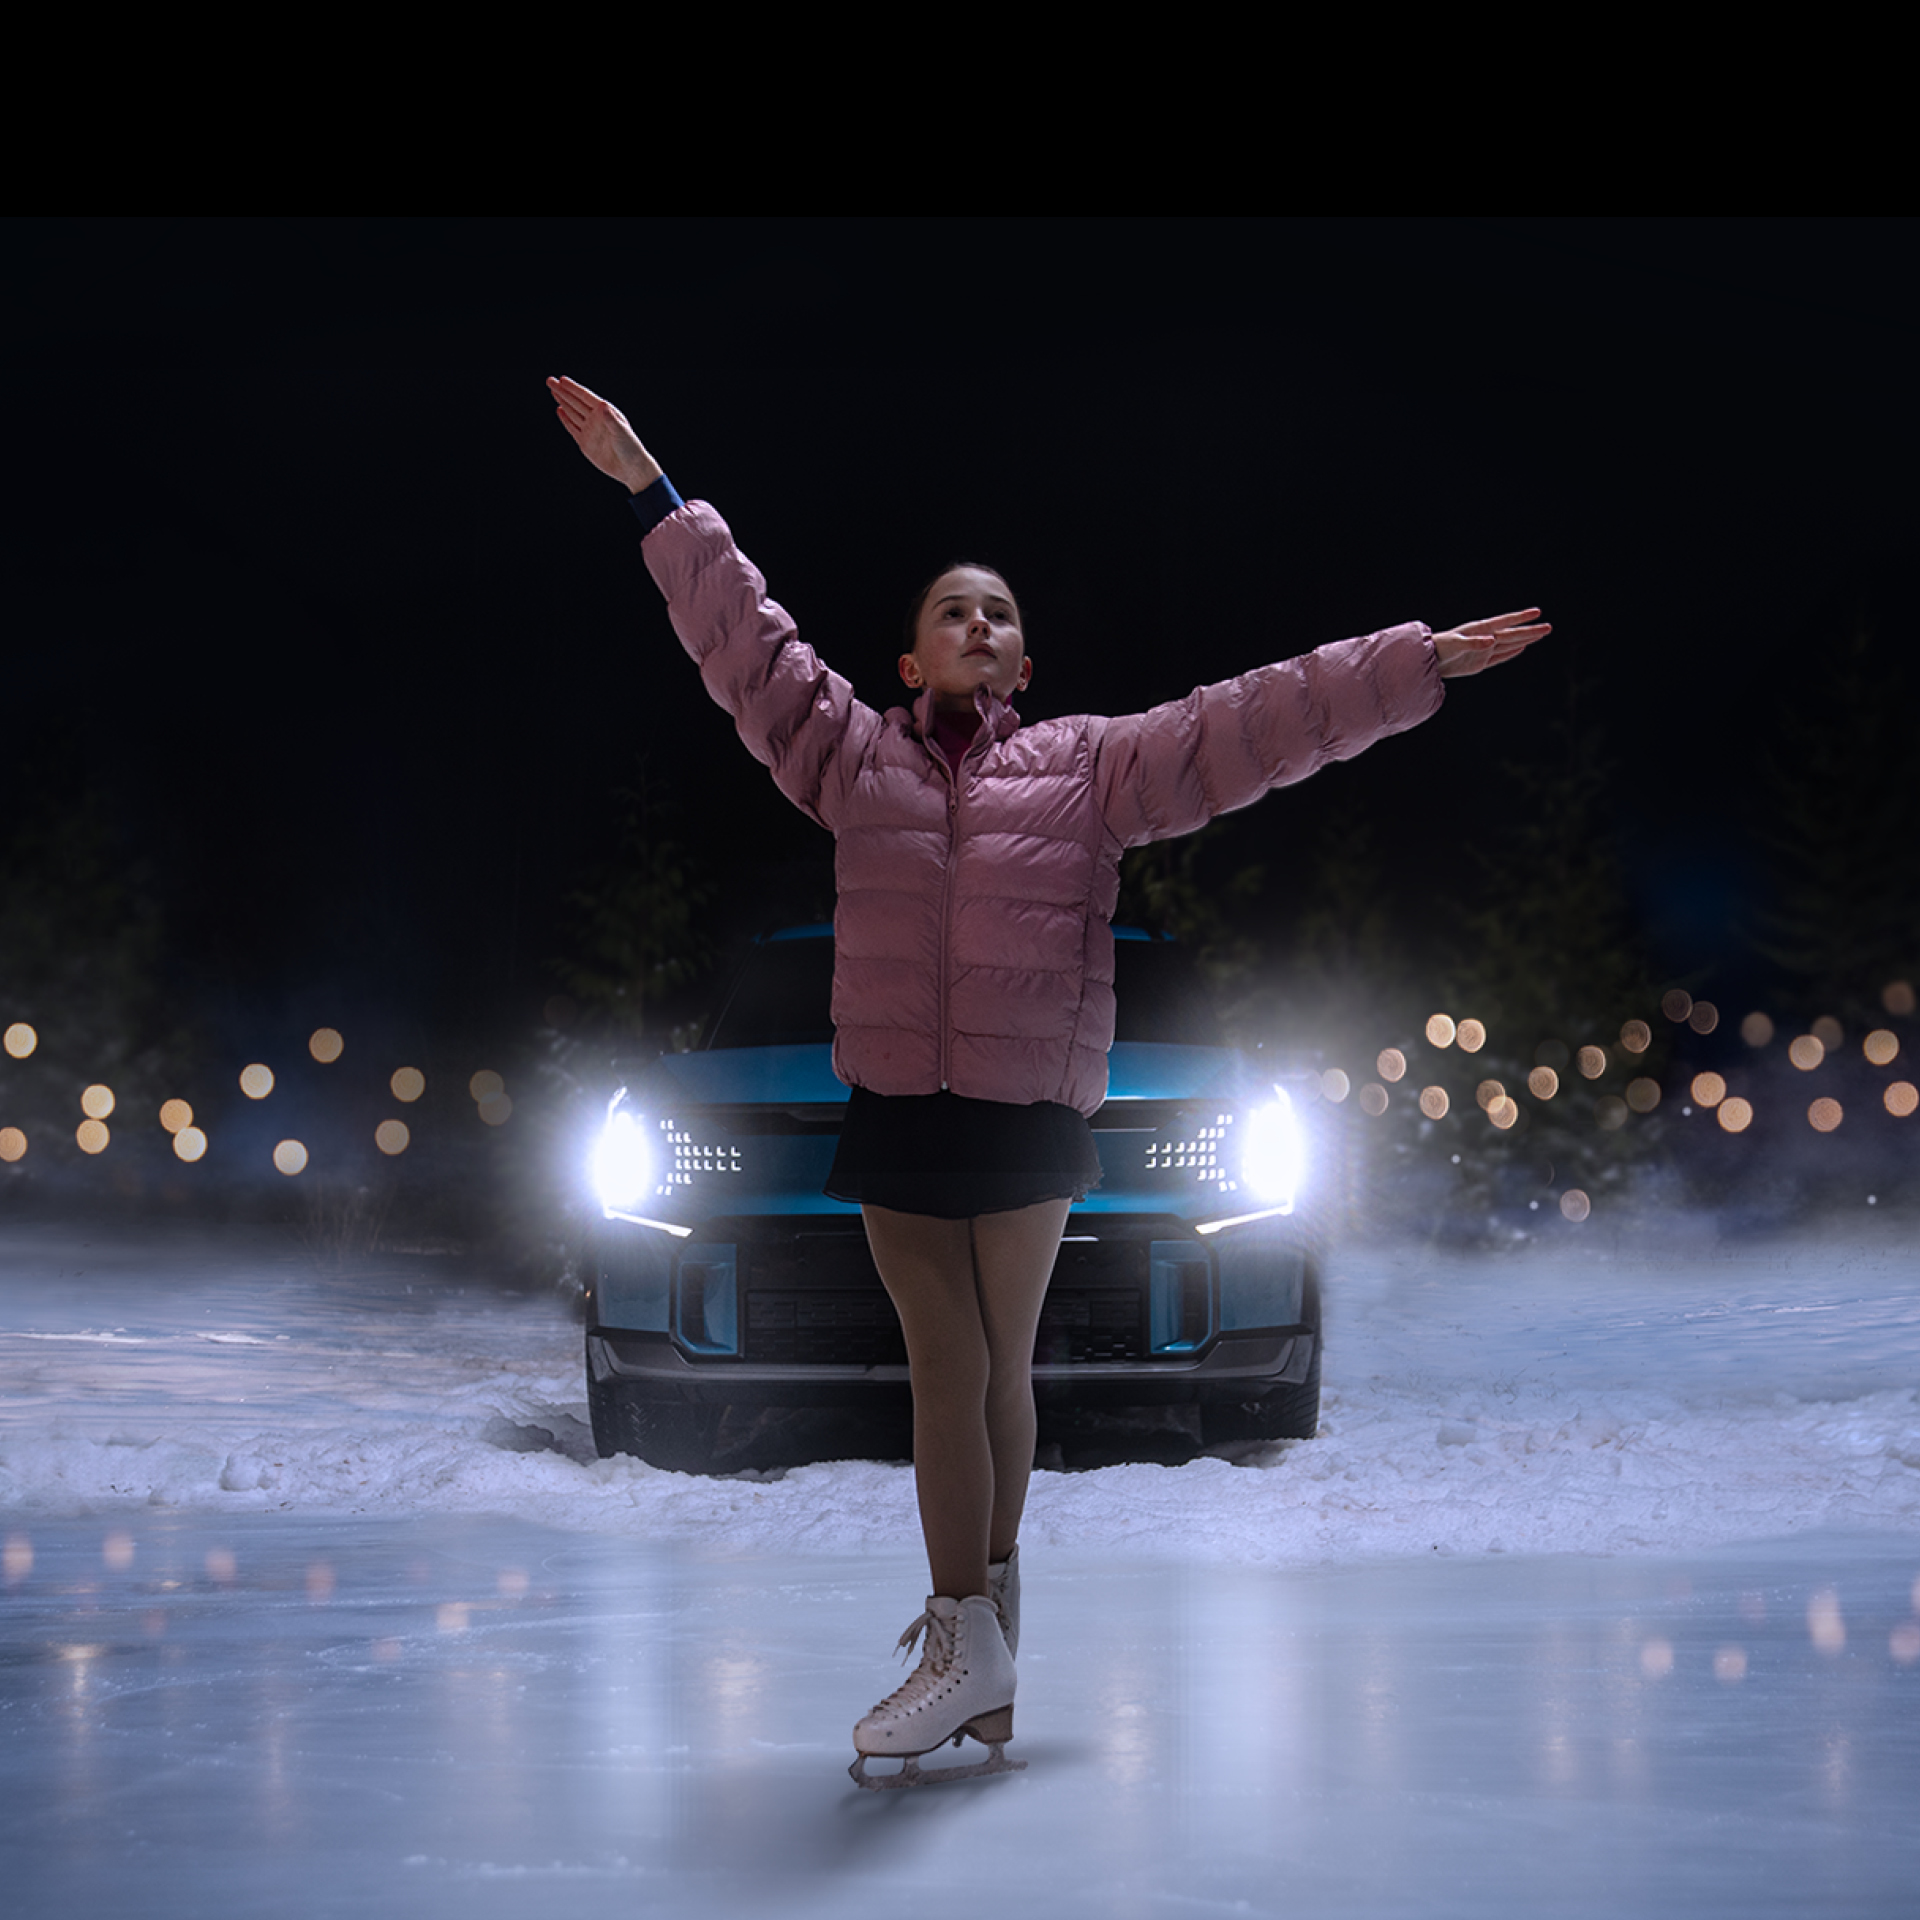 A girl spreading her arms wide and posing on the ice alongside a car.